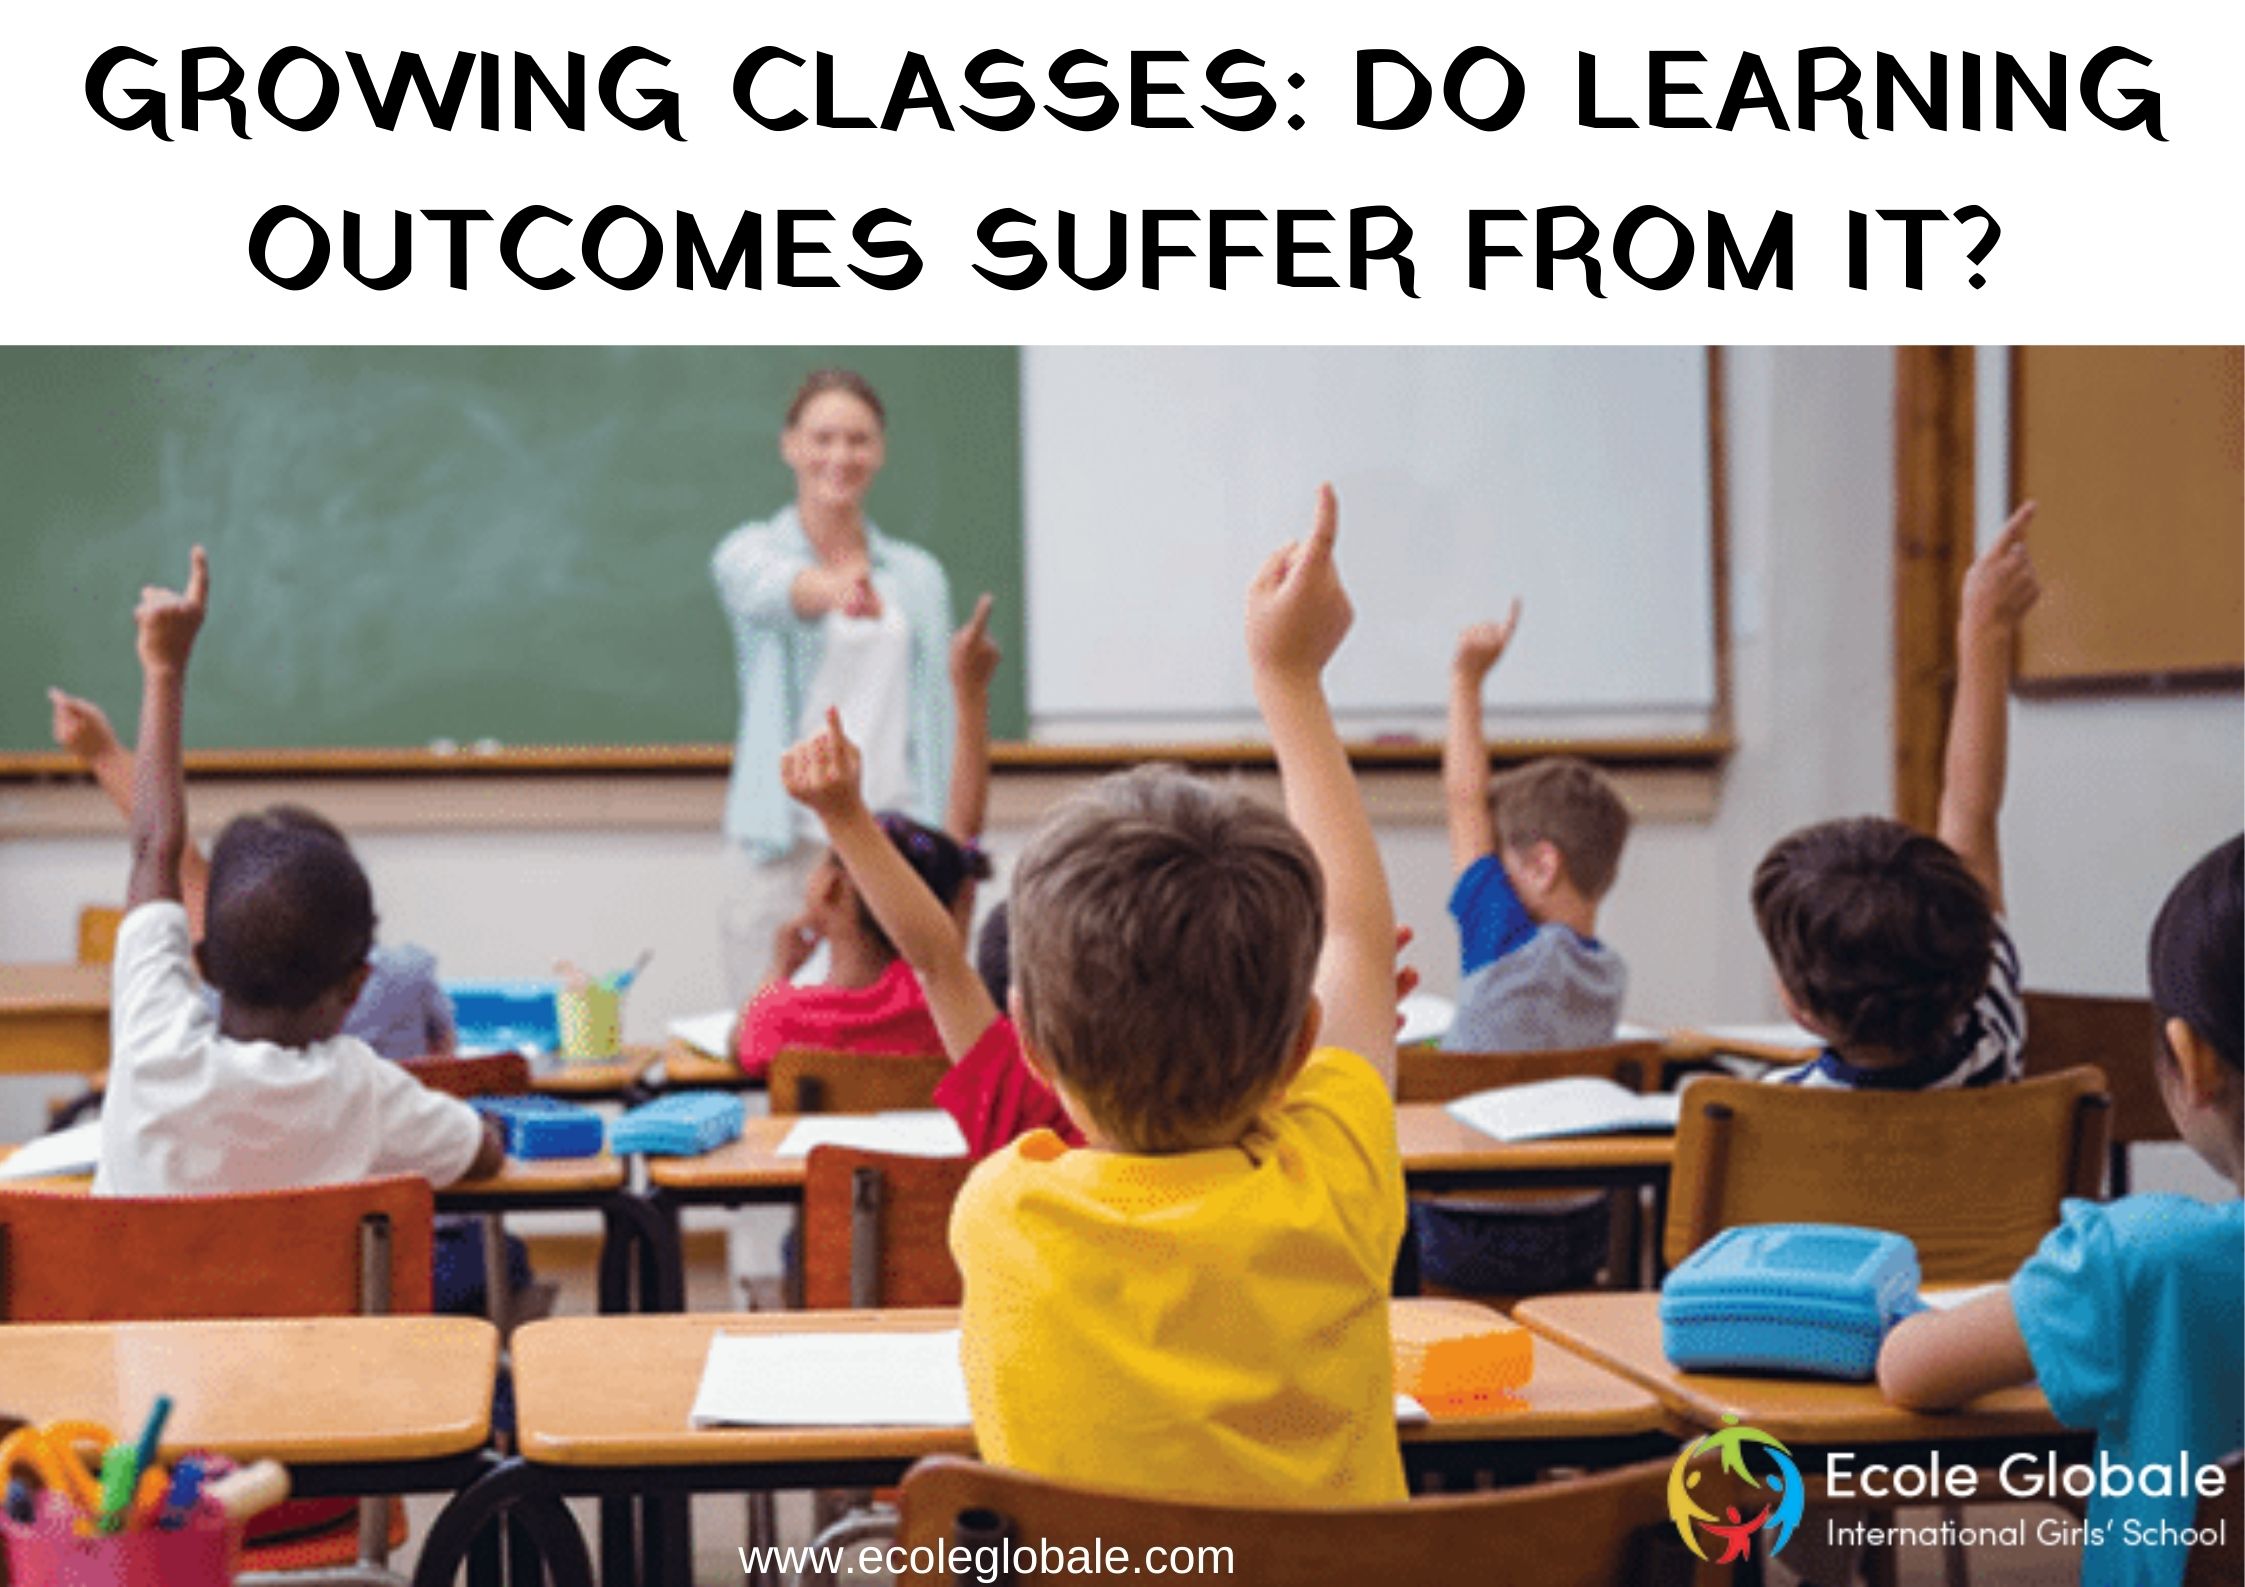 GROWING CLASSES: DO LEARNING OUTCOMES SUFFER FROM IT?